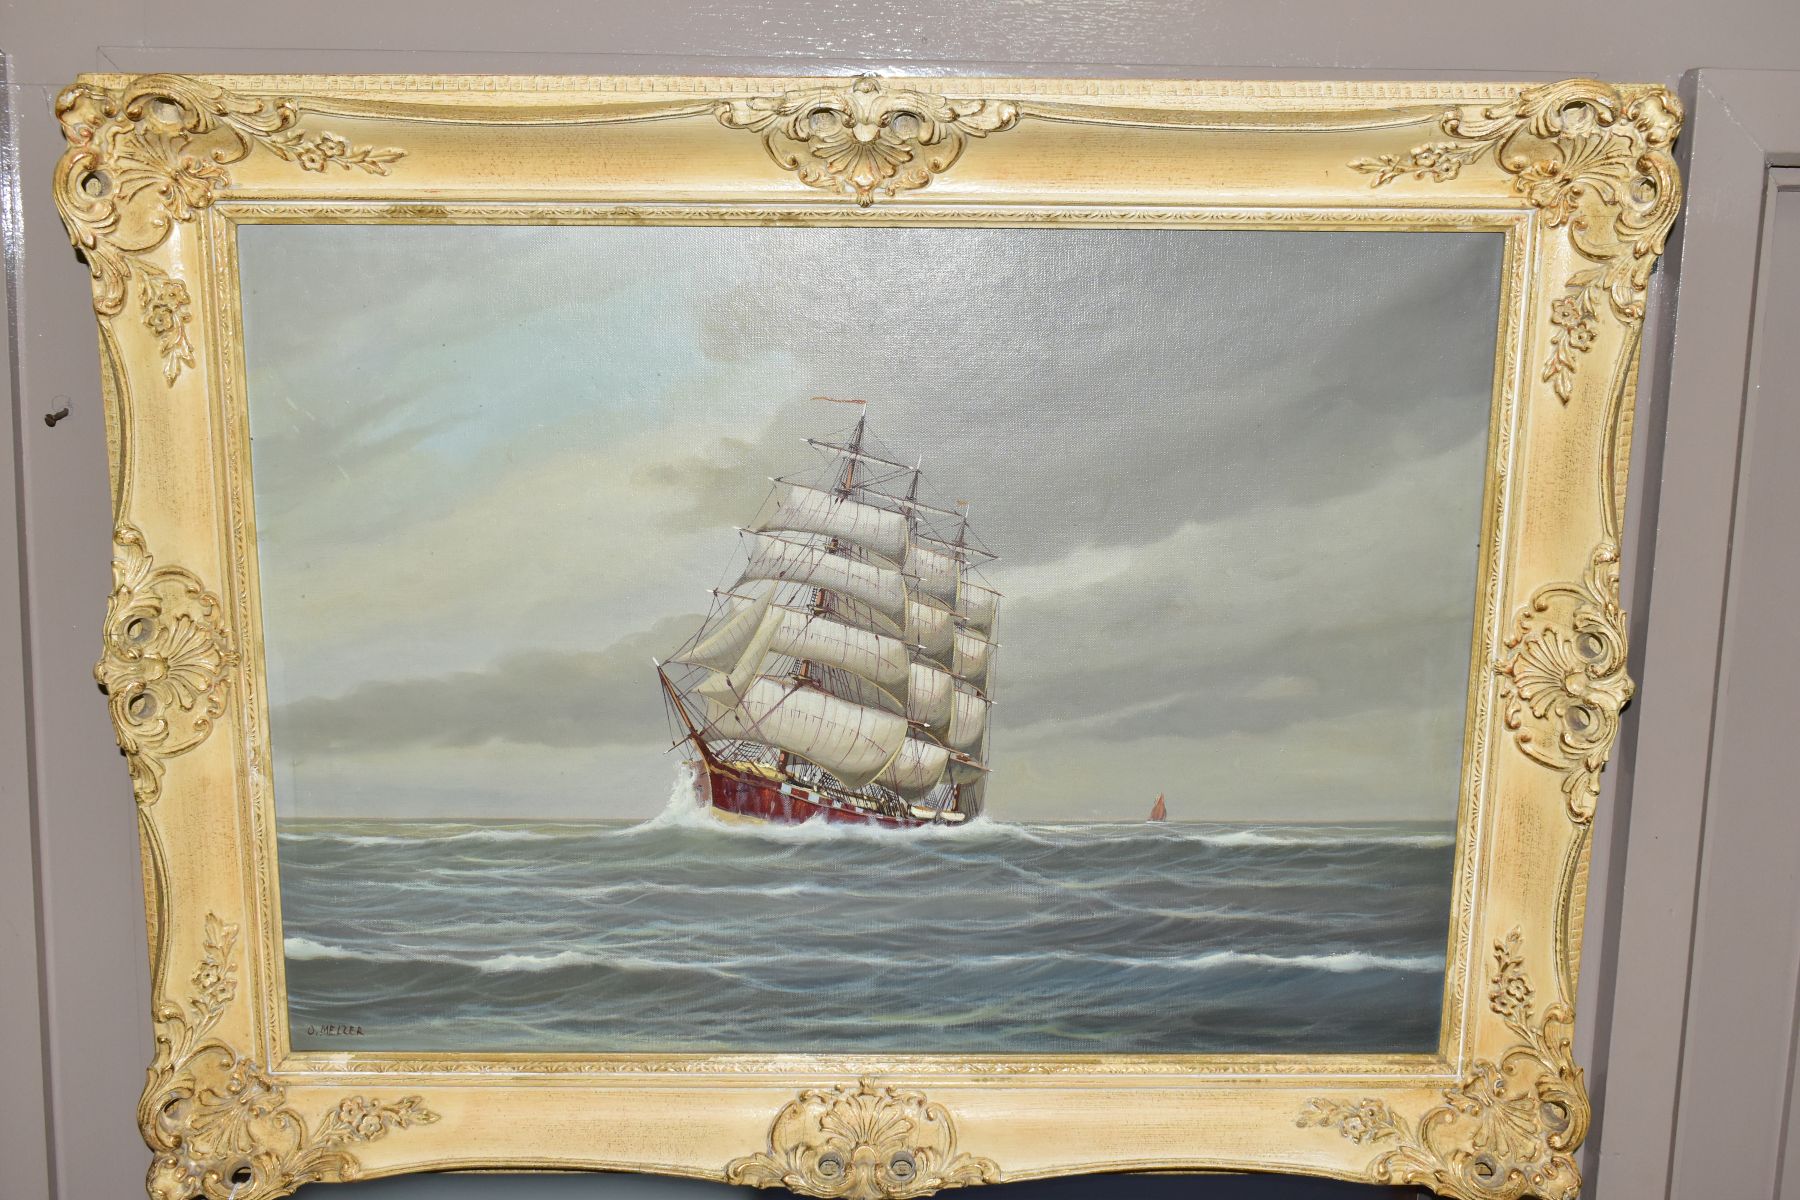 O MELZER (20TH CENTURY), A THREE MAST SQUARE RIGGED SHIP IN FULL SAIL, signed bottom left, oil on - Image 7 of 11